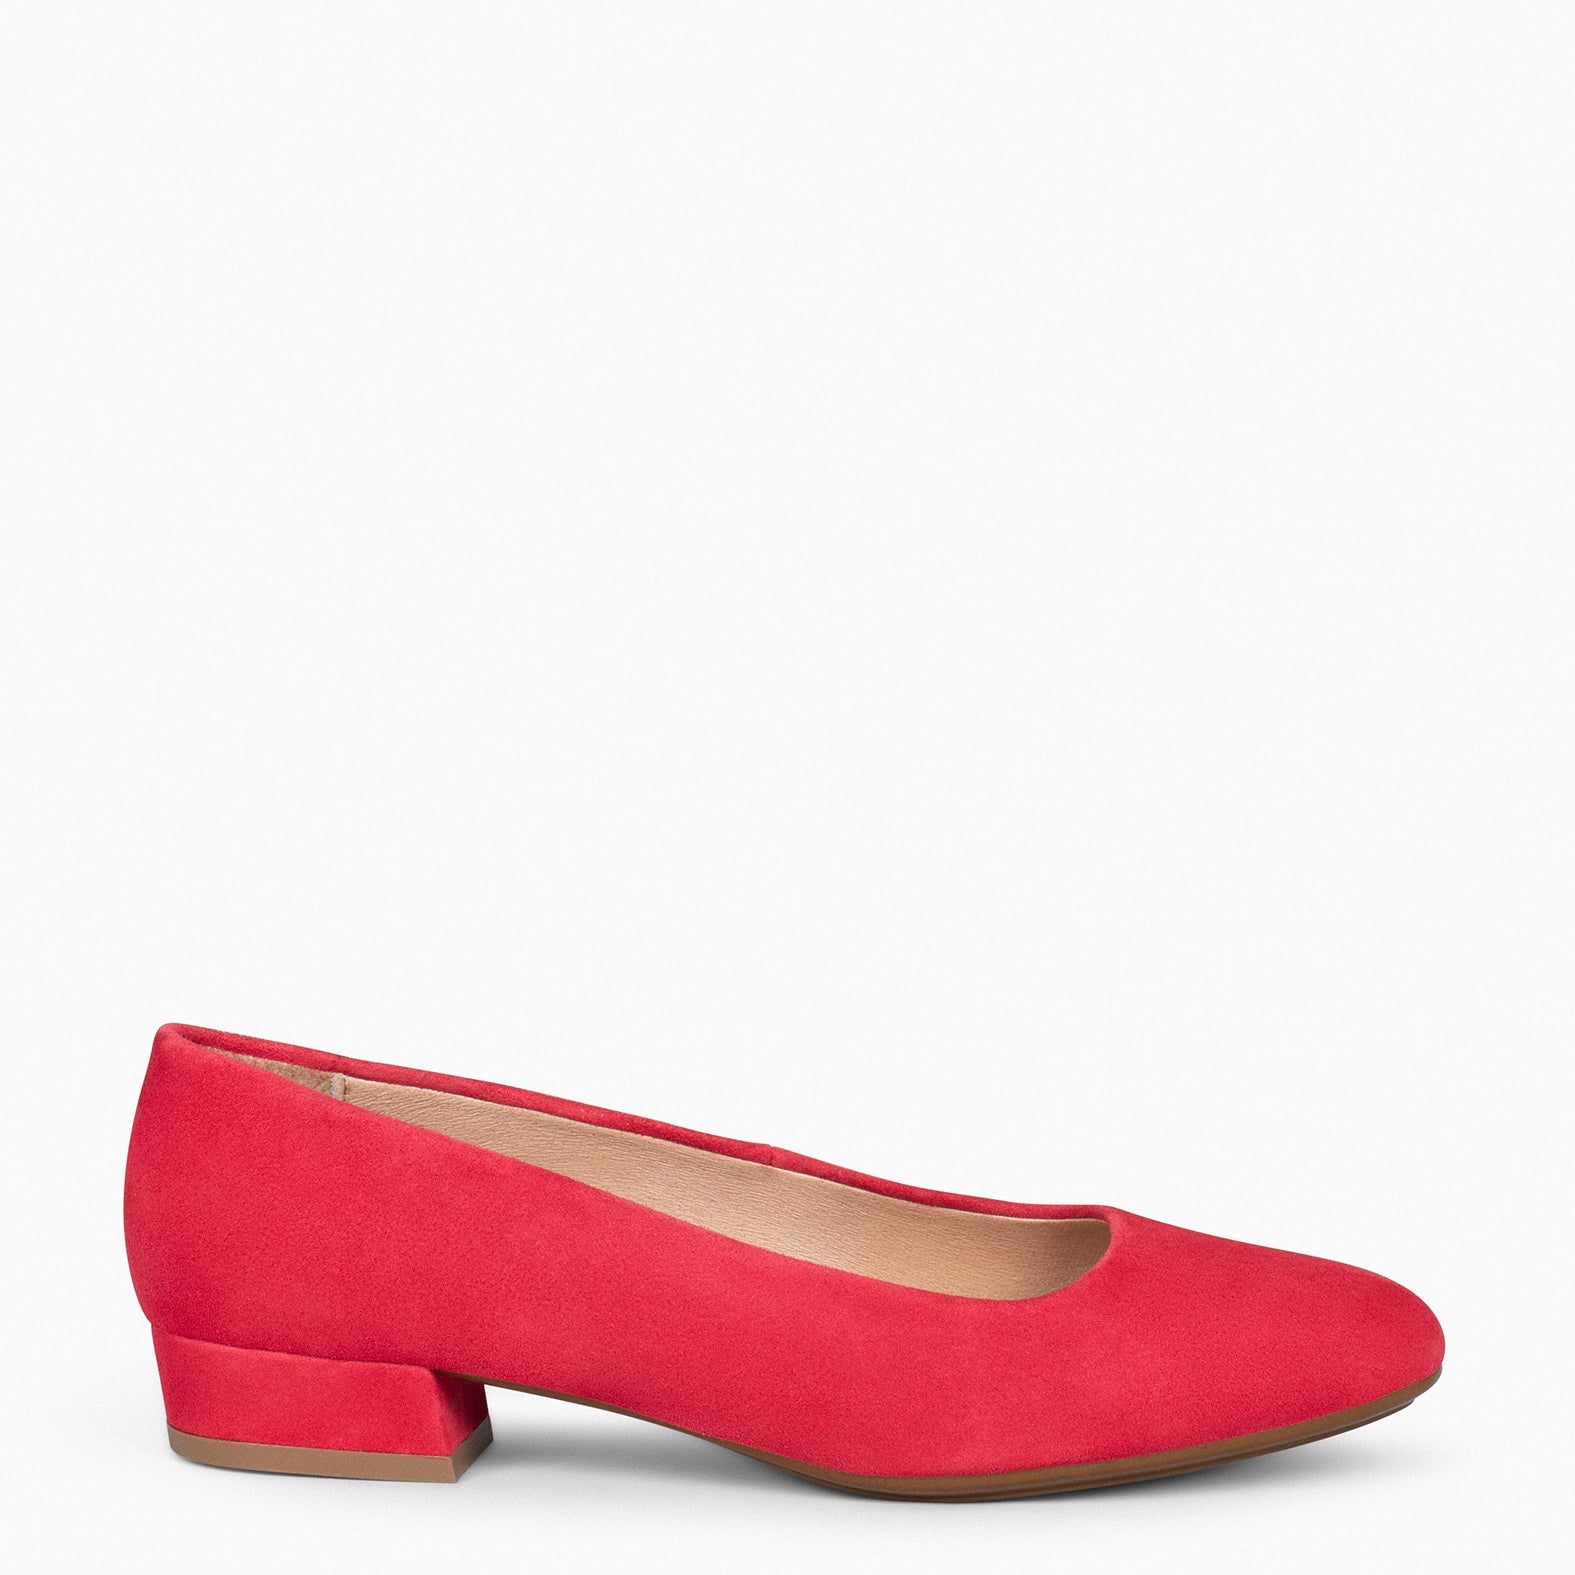 URBAN XS –  RED low-heeled suede shoes